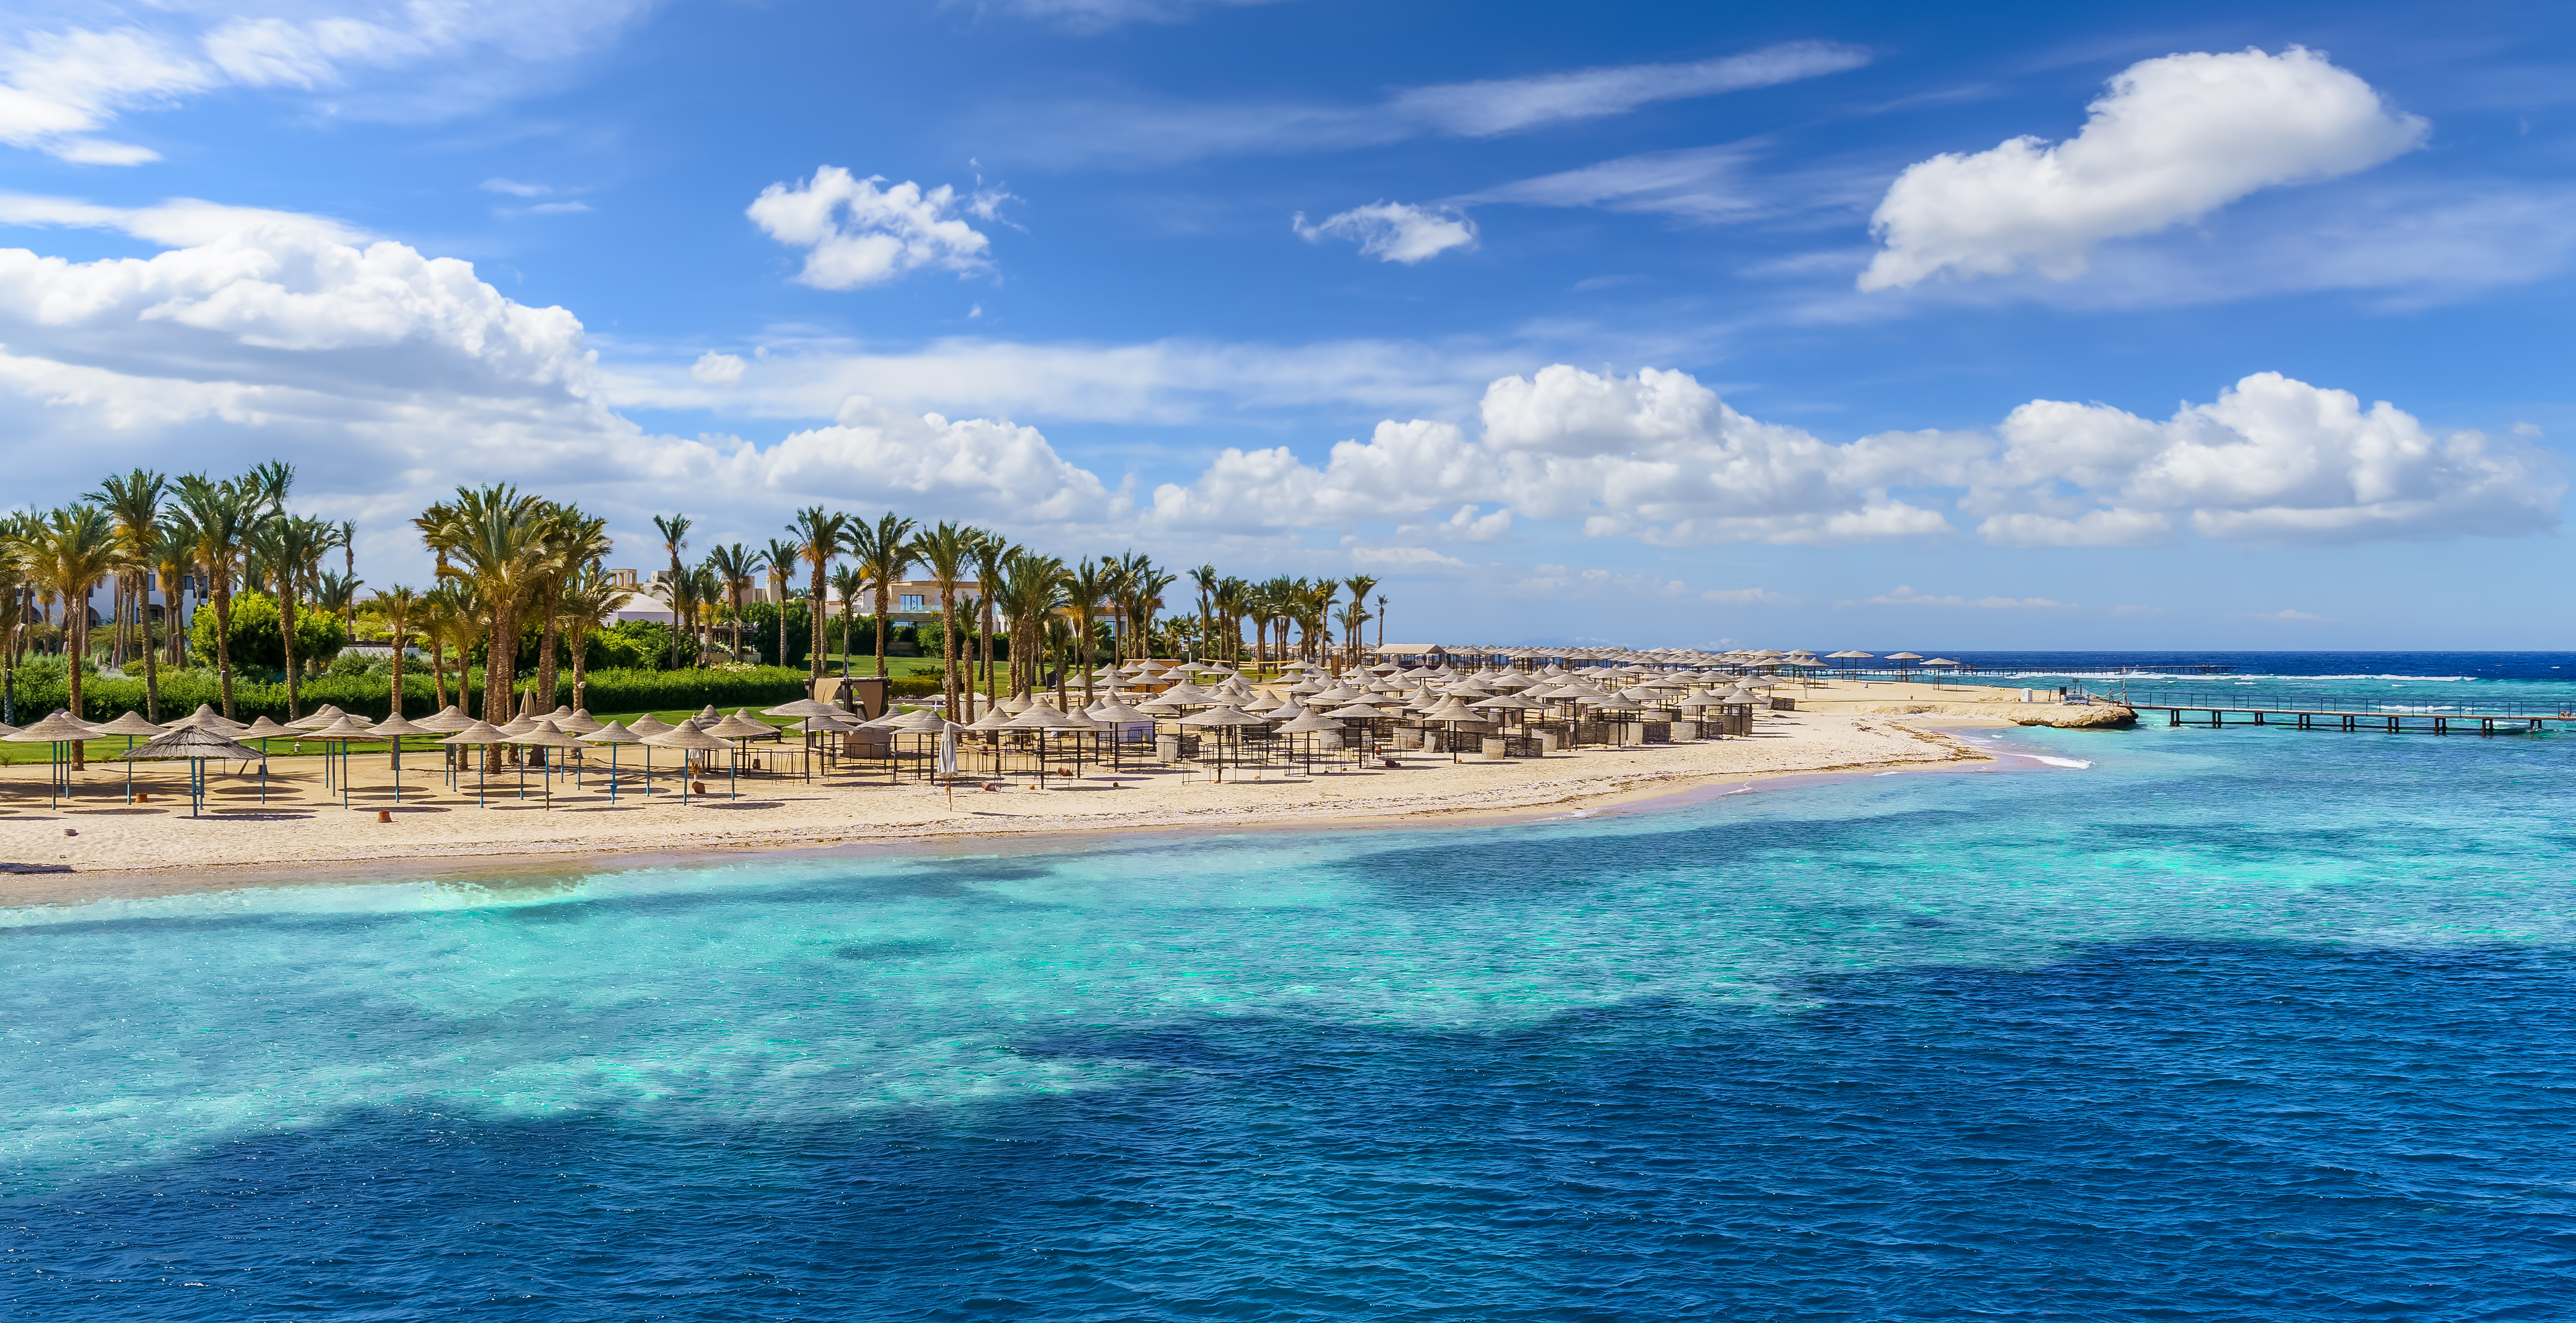 The weather in Marsa Alam is warm throughout the year, but holidaymakers can expect highs of 27C in November.